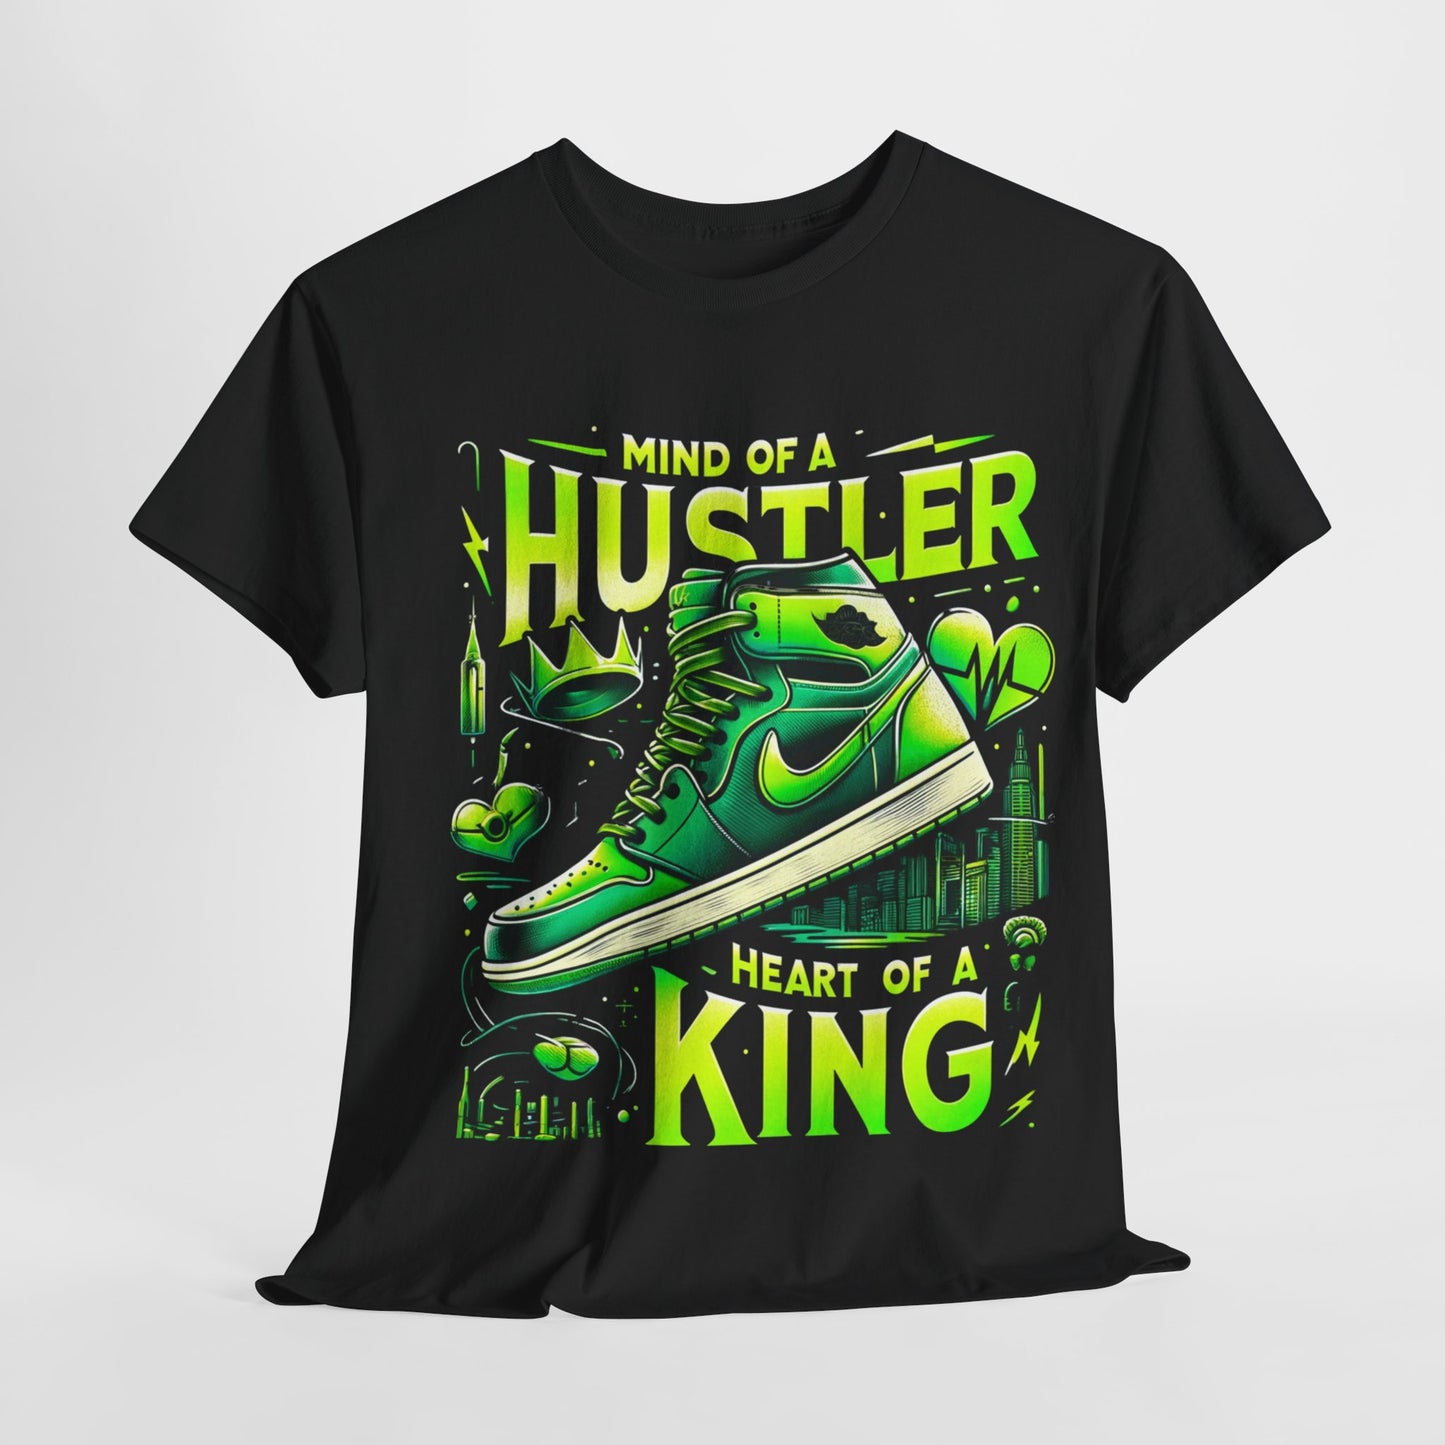 "Mind of a Hustler Heart of a King" Tee - Green Glow Sneakers